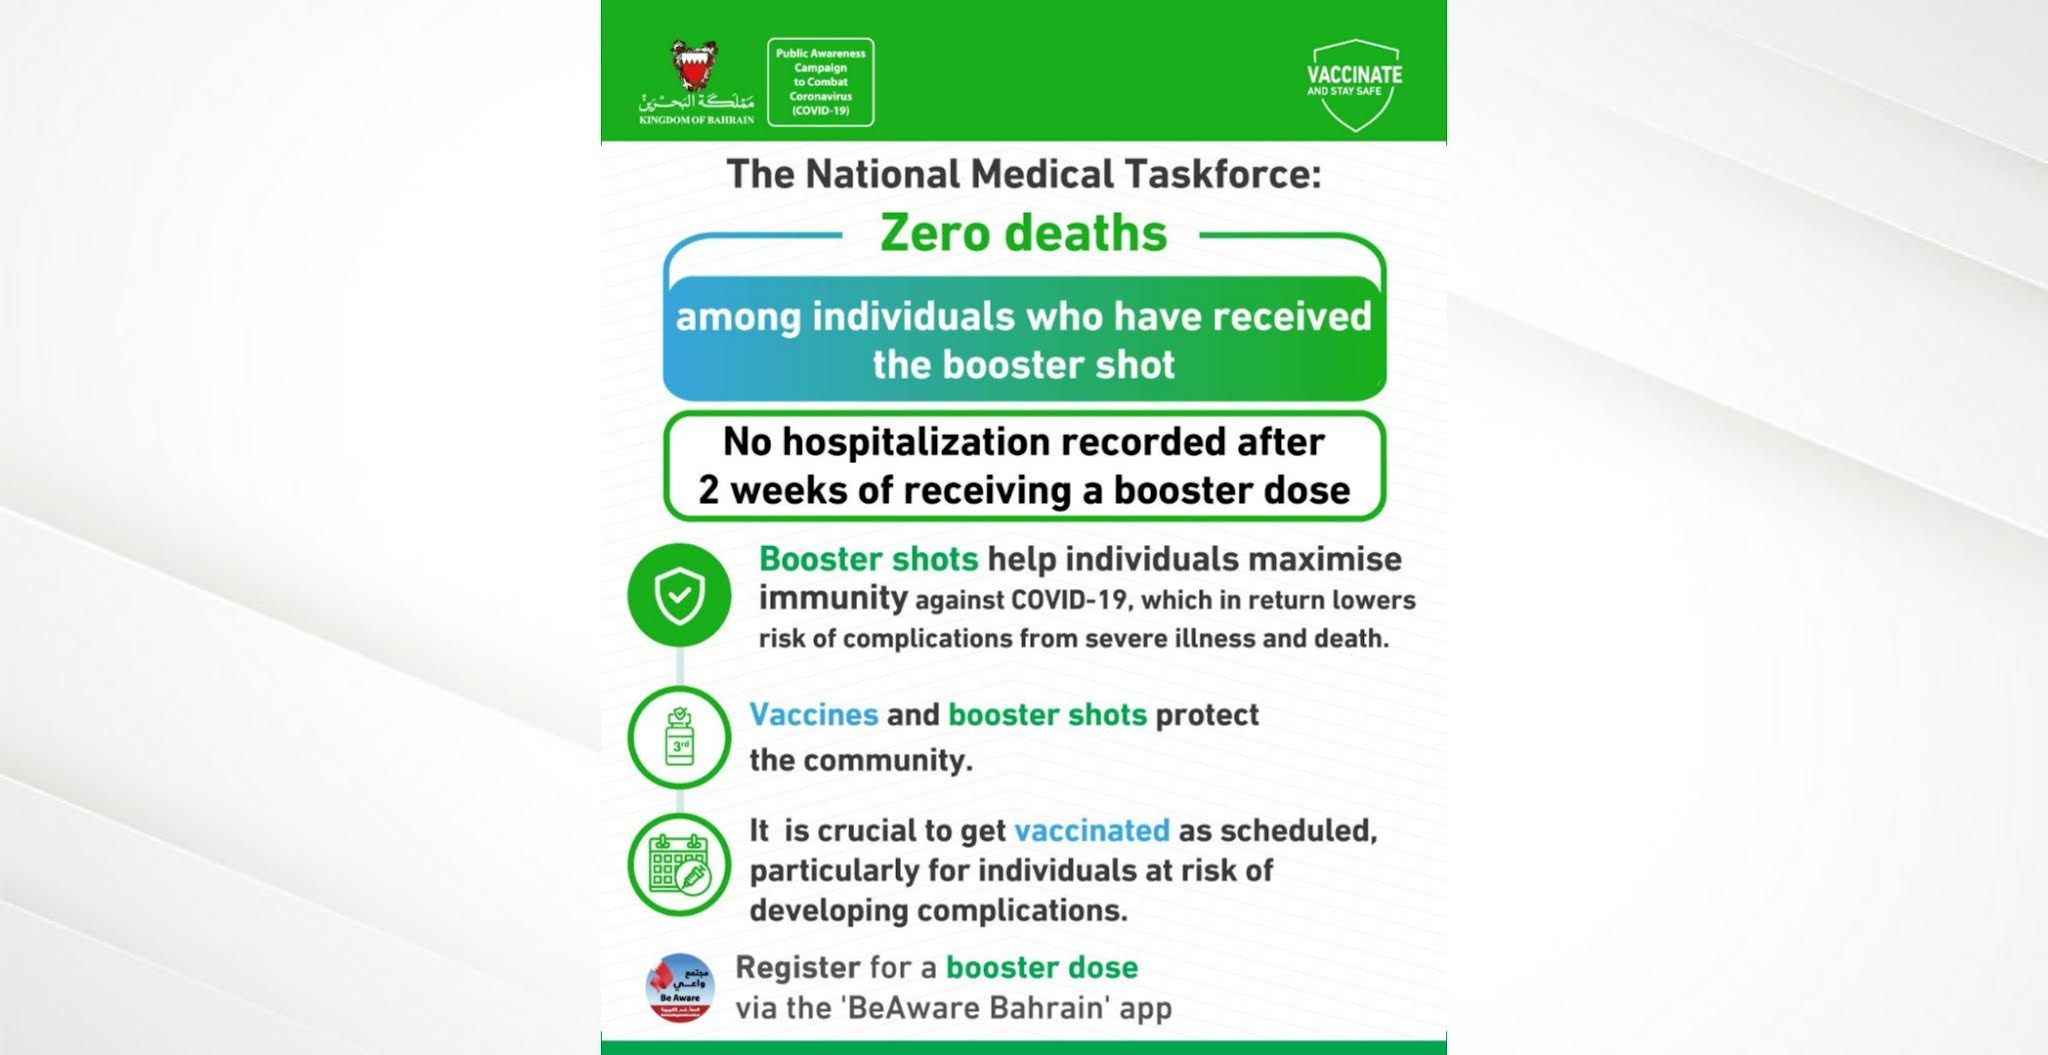 The National Medical Taskforce for Combatting the Coronavirus (COVID-19) highlights the benefits of booster shots: 27 July 2021